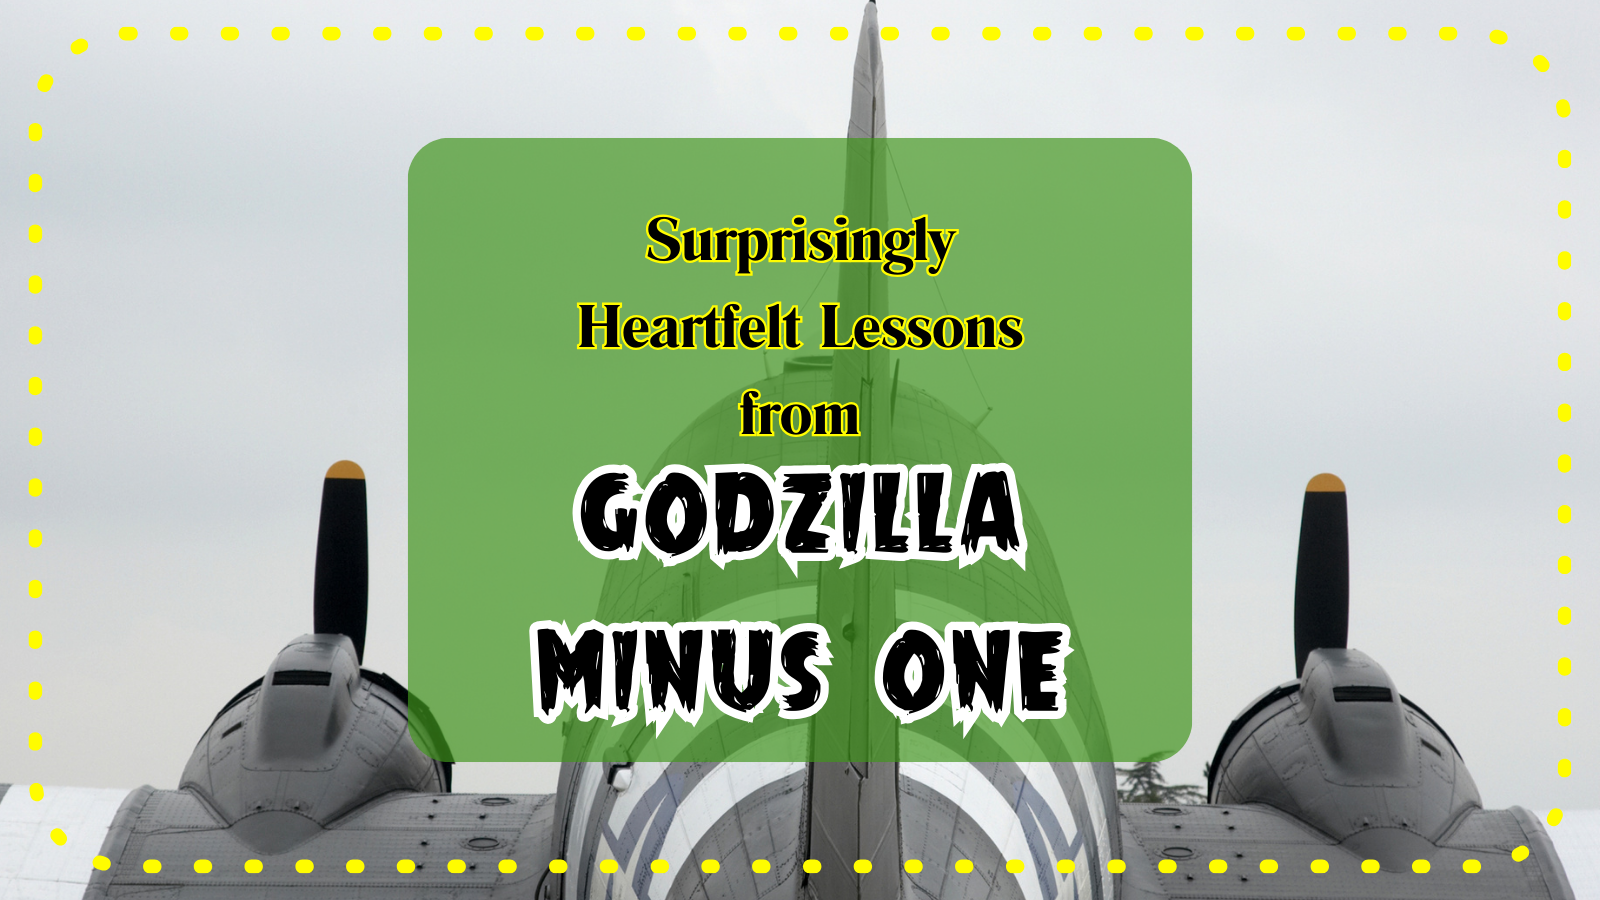 Lessons from Godzilla Minus One